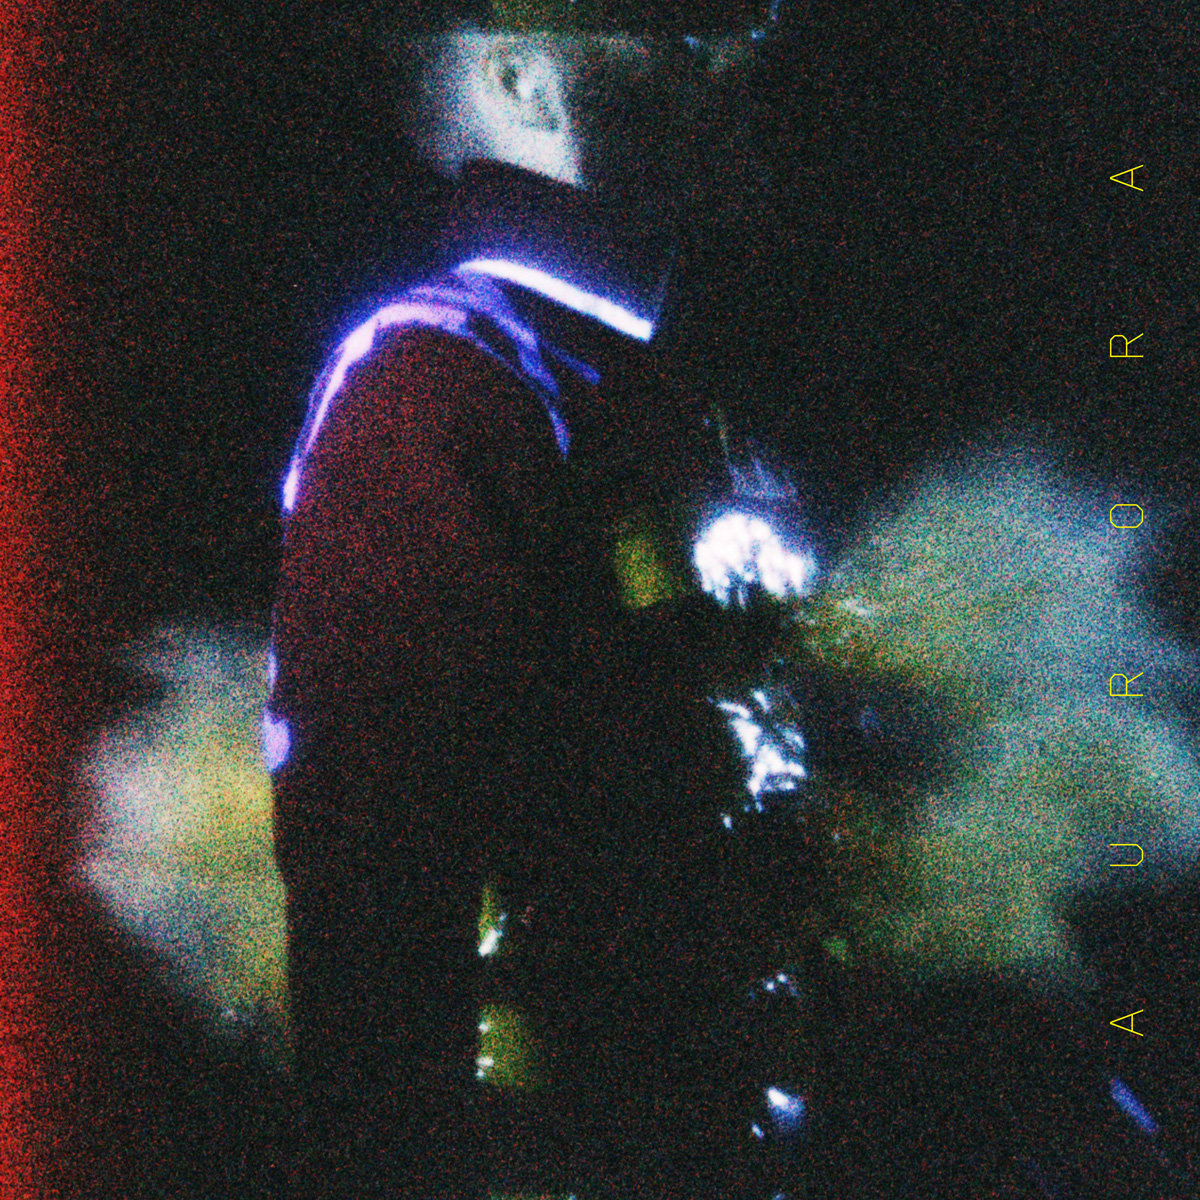 a pixelated person in a military jacket with green and yellowed colored lights projected and face in shadow, Aurora. 